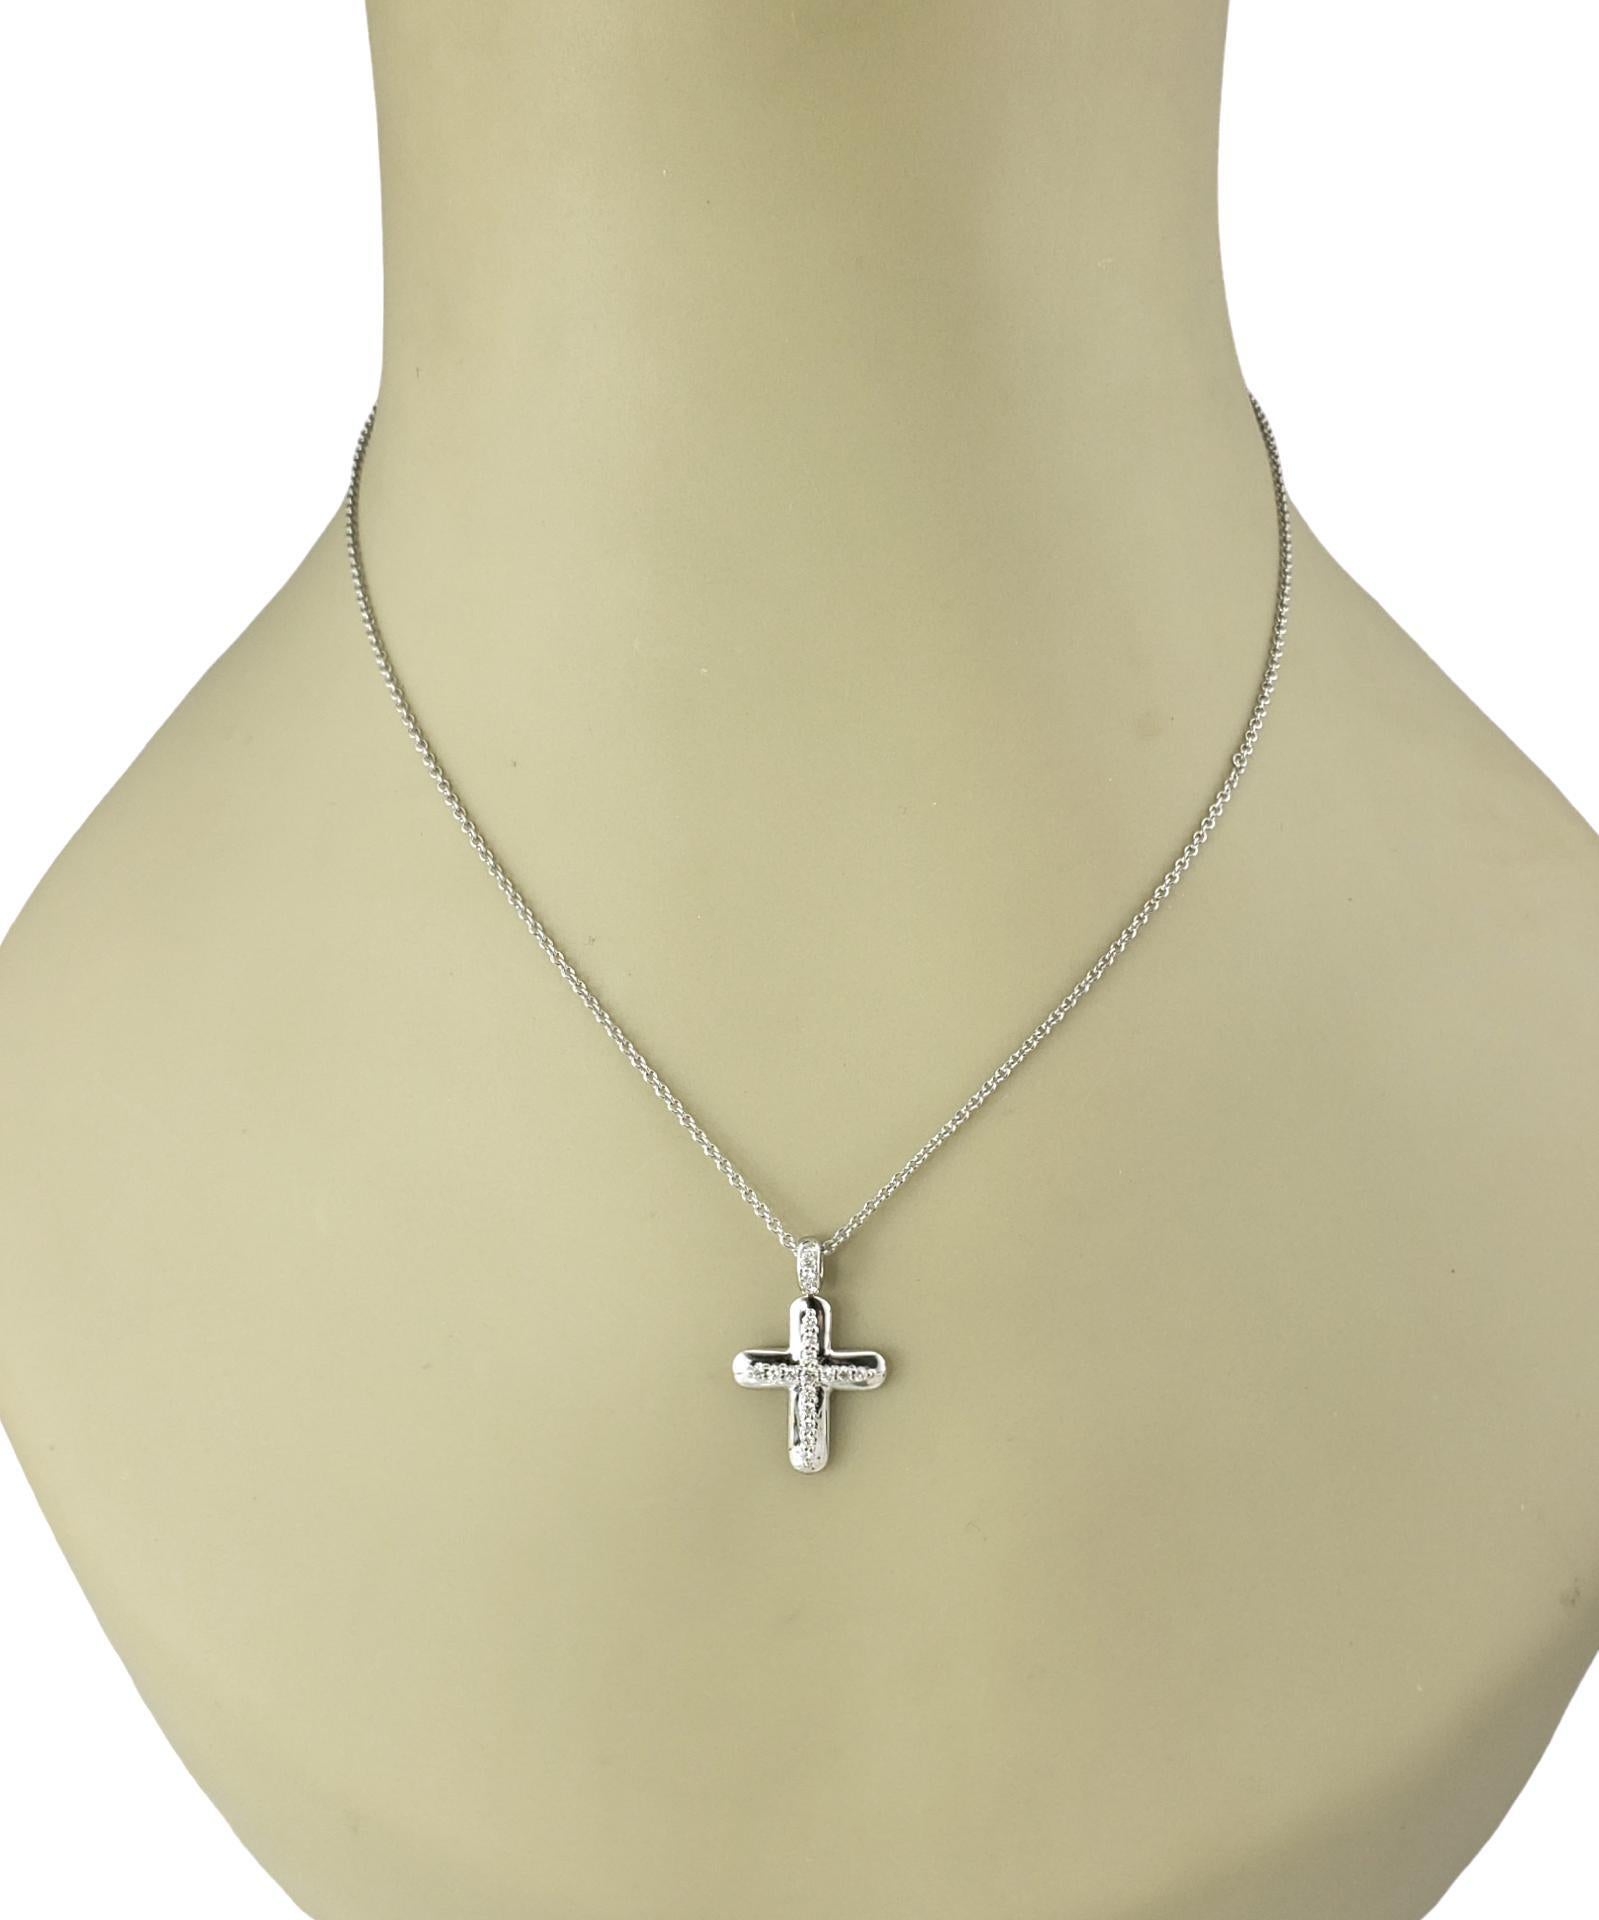 18 Karat White Gold and Diamond Cross Pendant Necklace #17226 For Sale 2